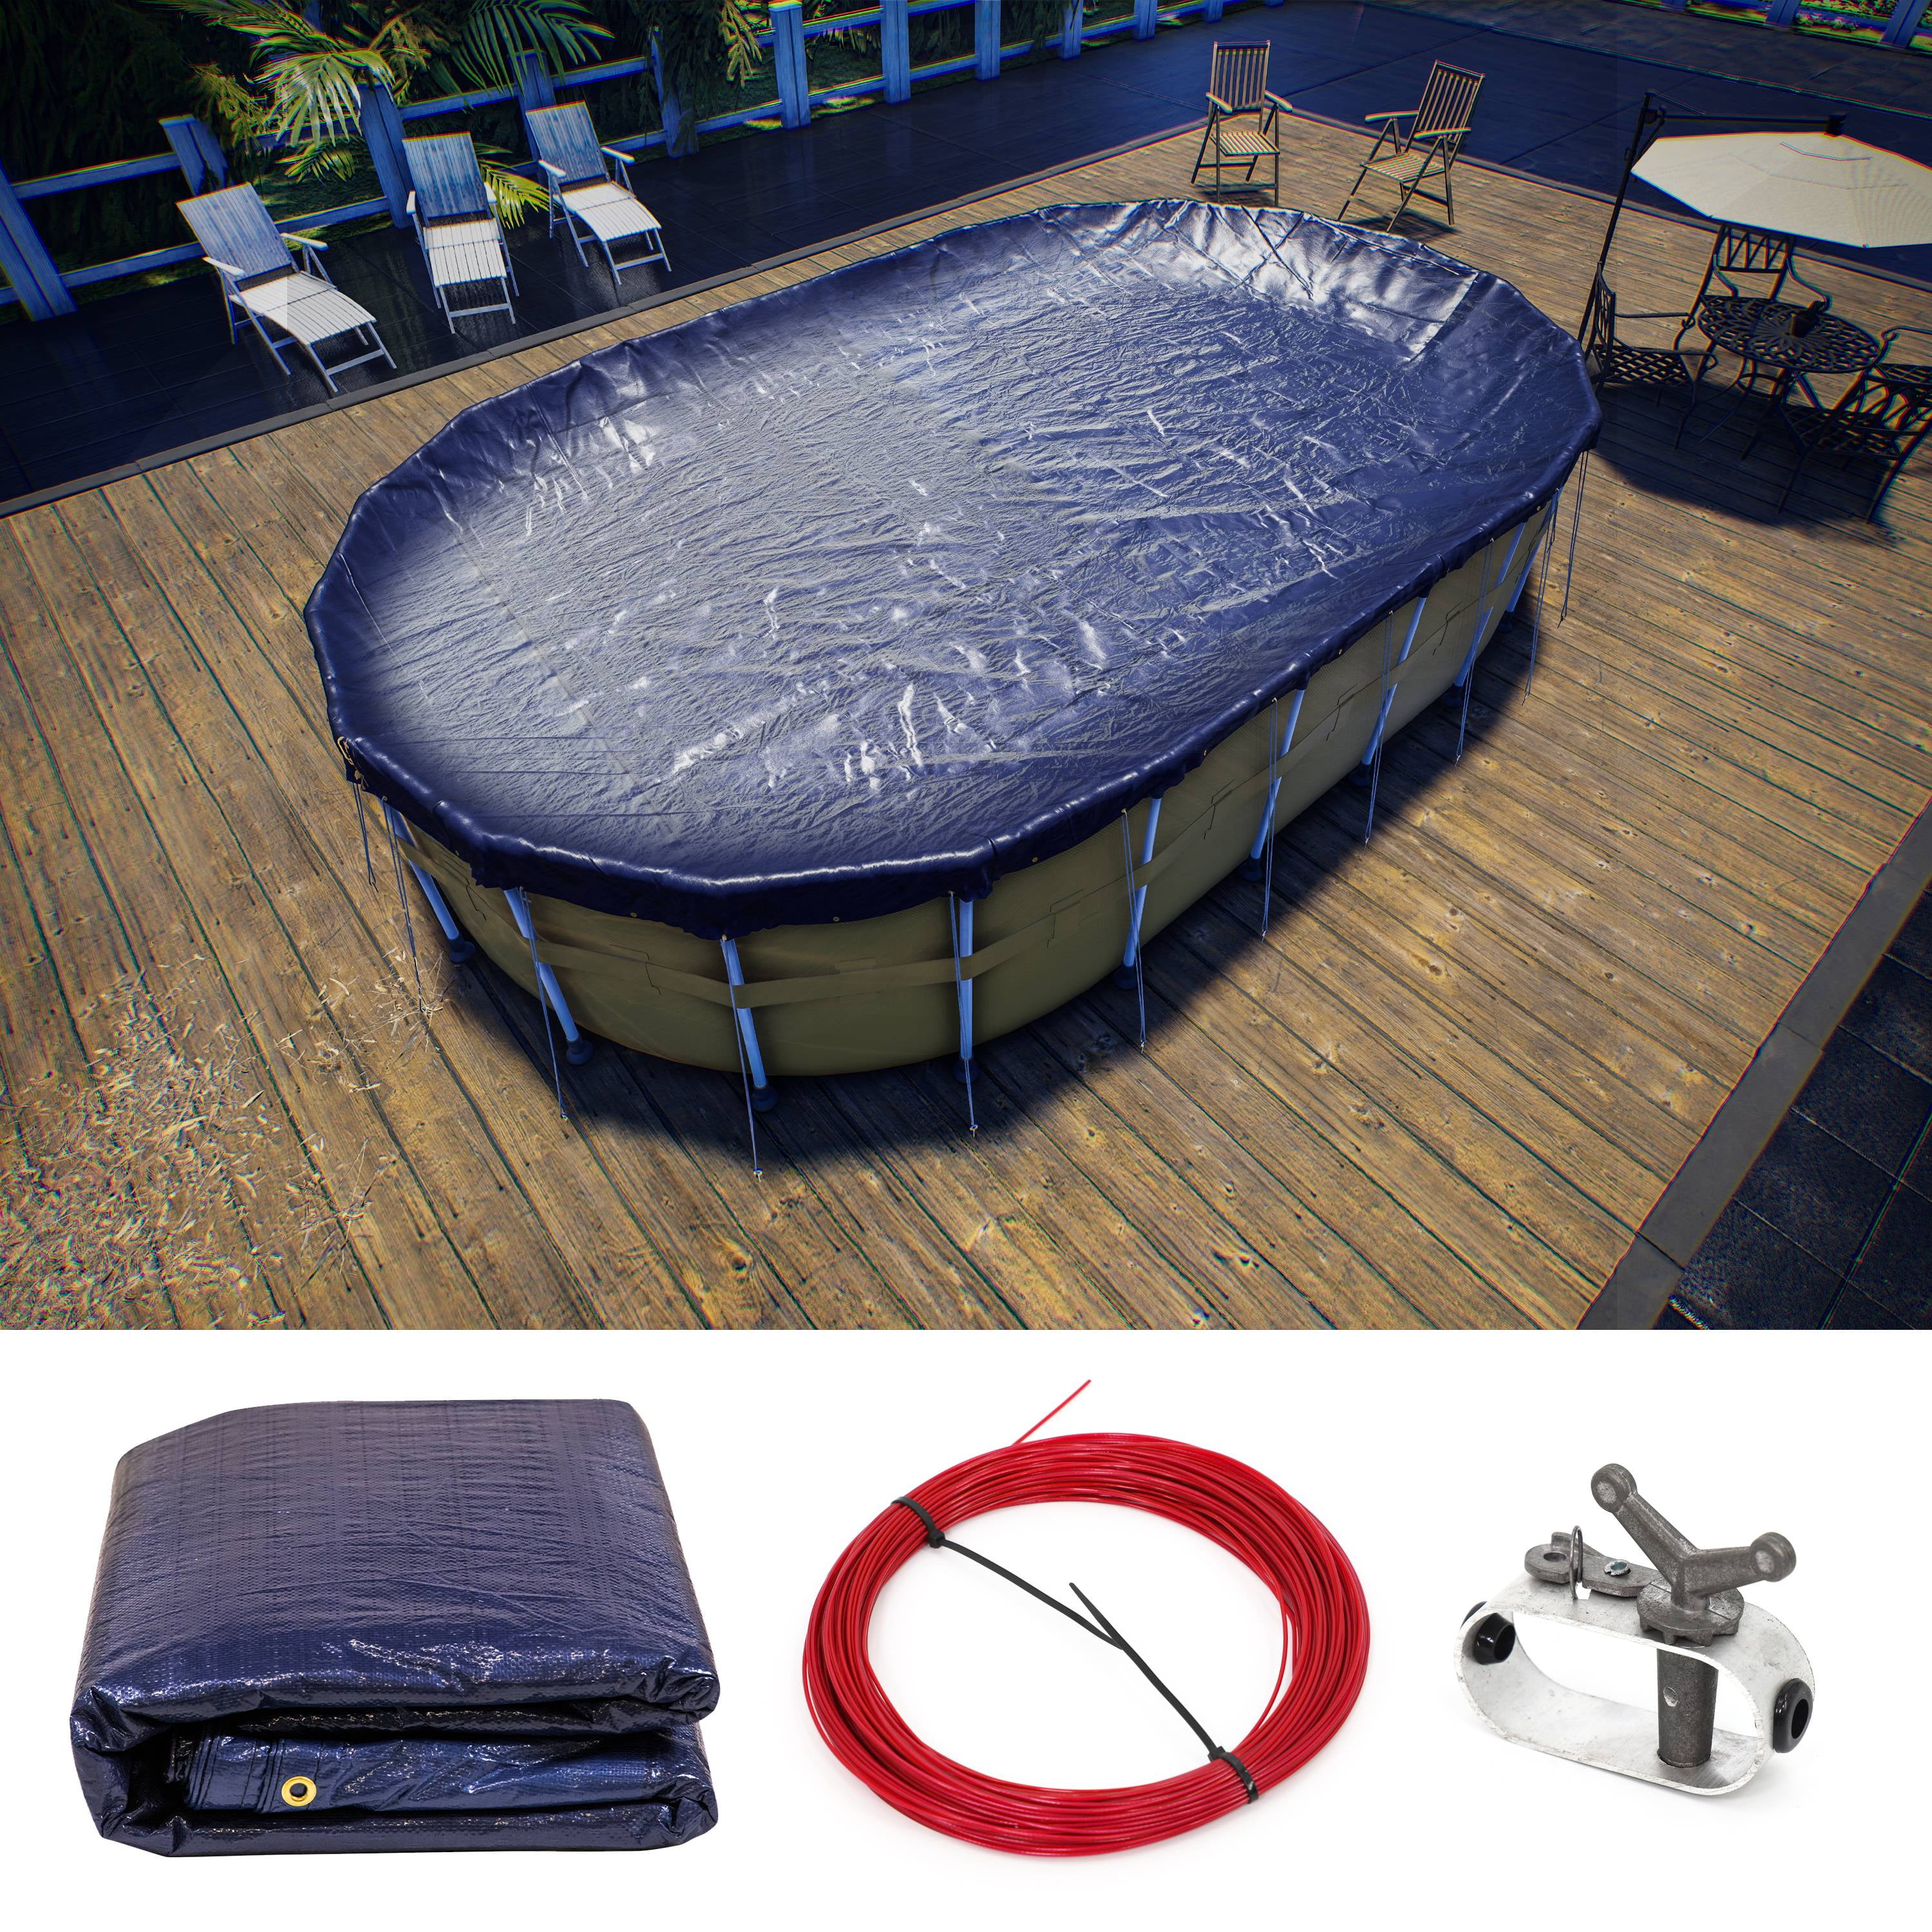 Leaf Net Pool Cover,Protective Mesh Cover with Reinforcement Edge and Rope,  All-Weather Outdoor Cover for Inground and Above Ground Swimming